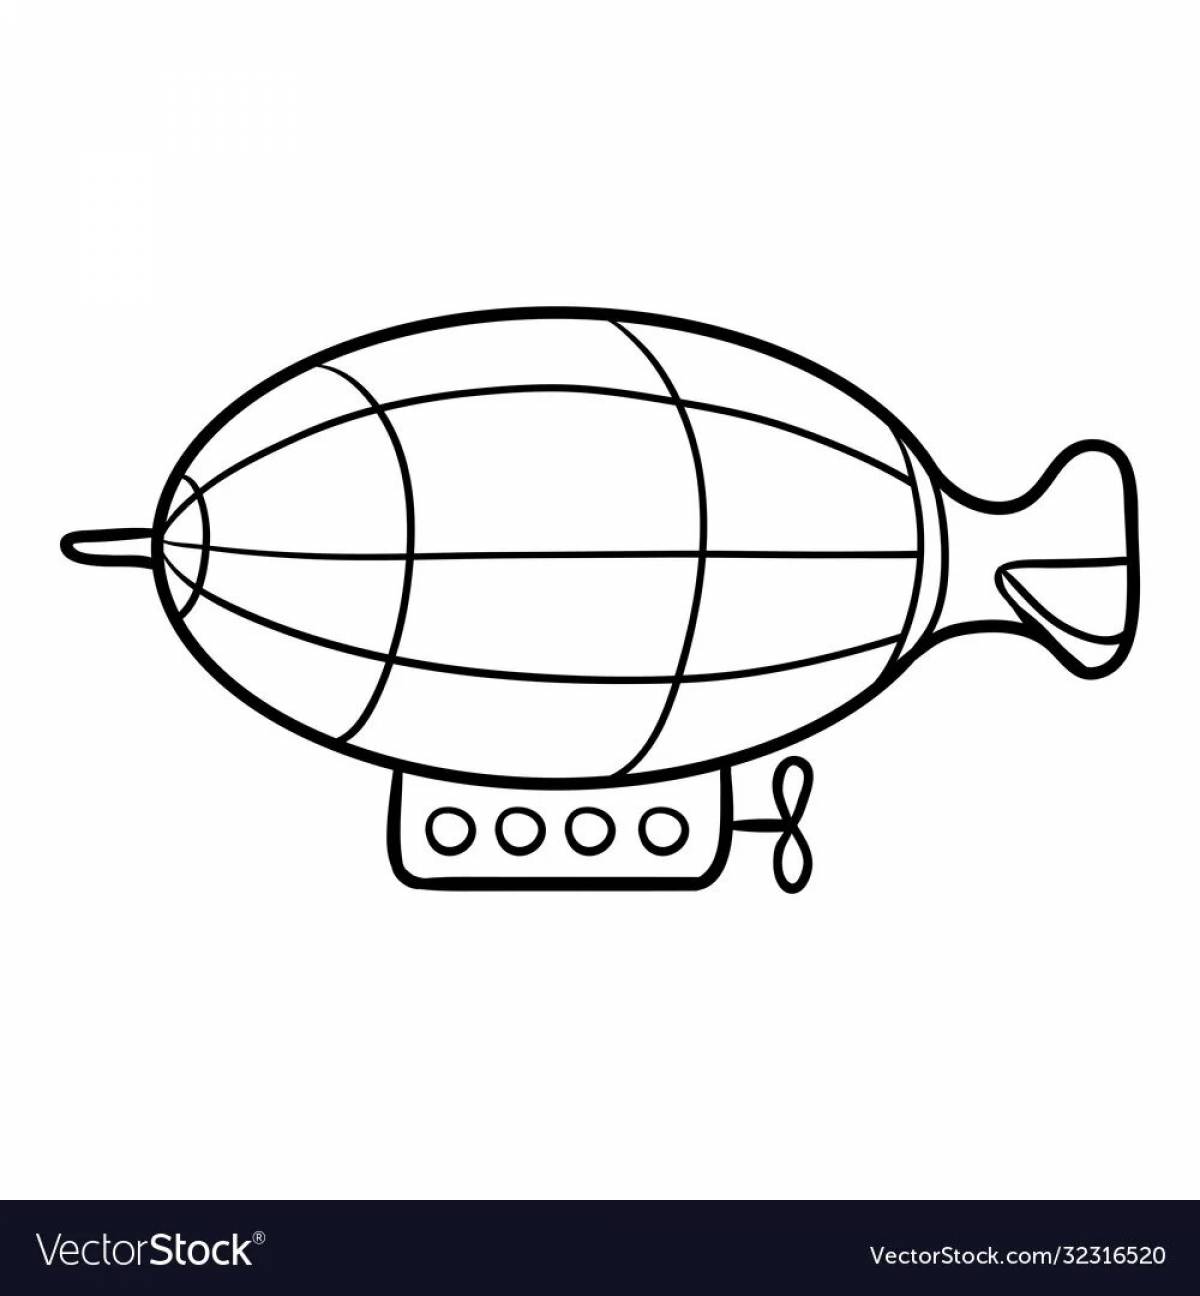 Fancy airship coloring book for kids